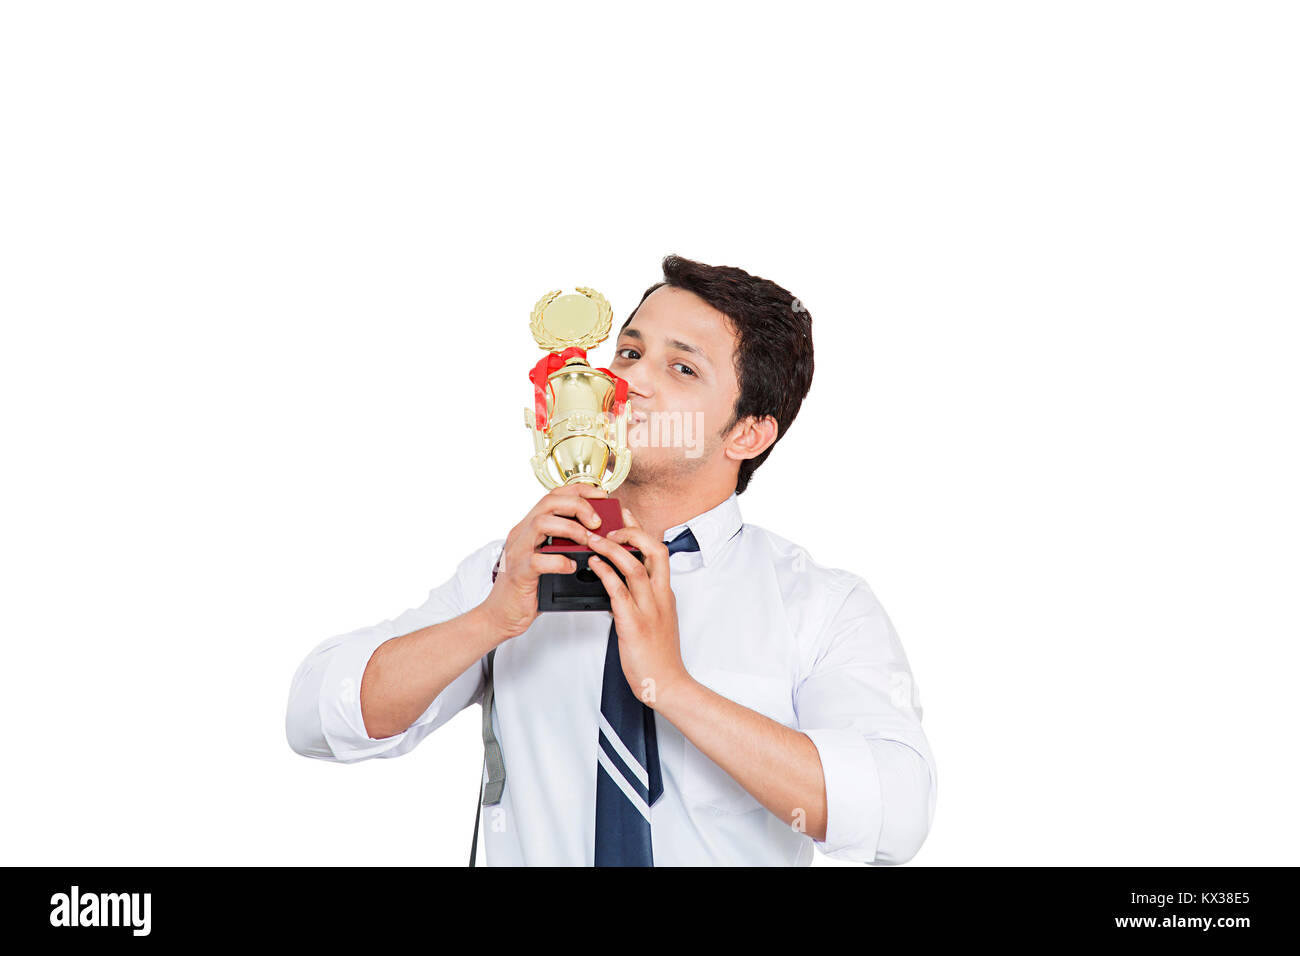 1 Indian High School Boy Student Kissing Winning Trophy Succes Stock Photo